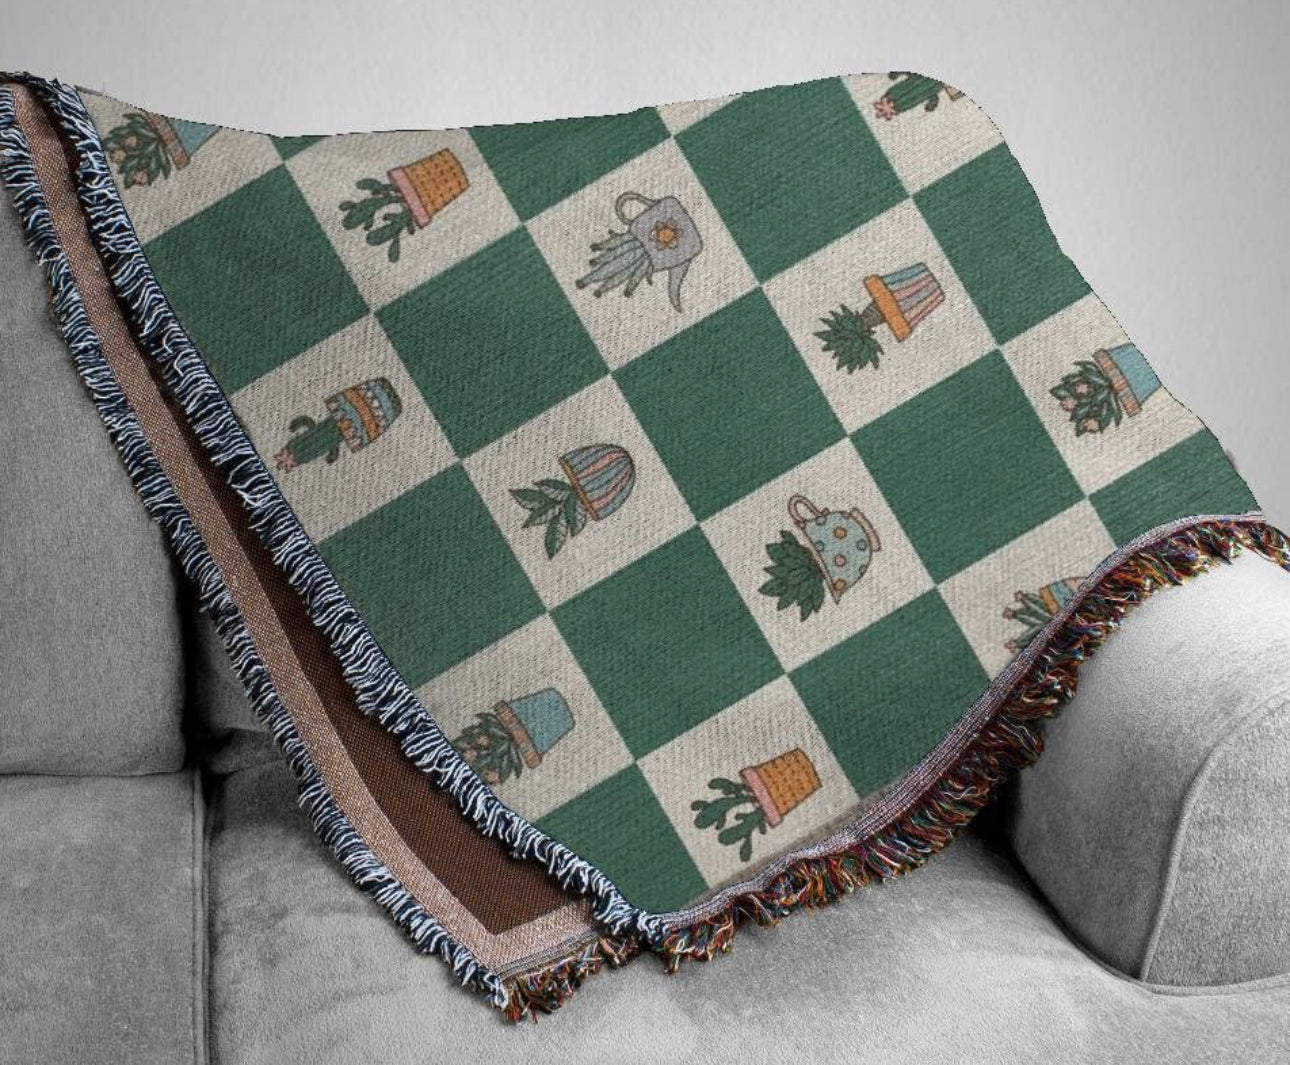 Plant checkered Woven Blanket. aesthetic checkered decor Green Chess With Potted Plants For Plant Lovers. Plant theme home decor.